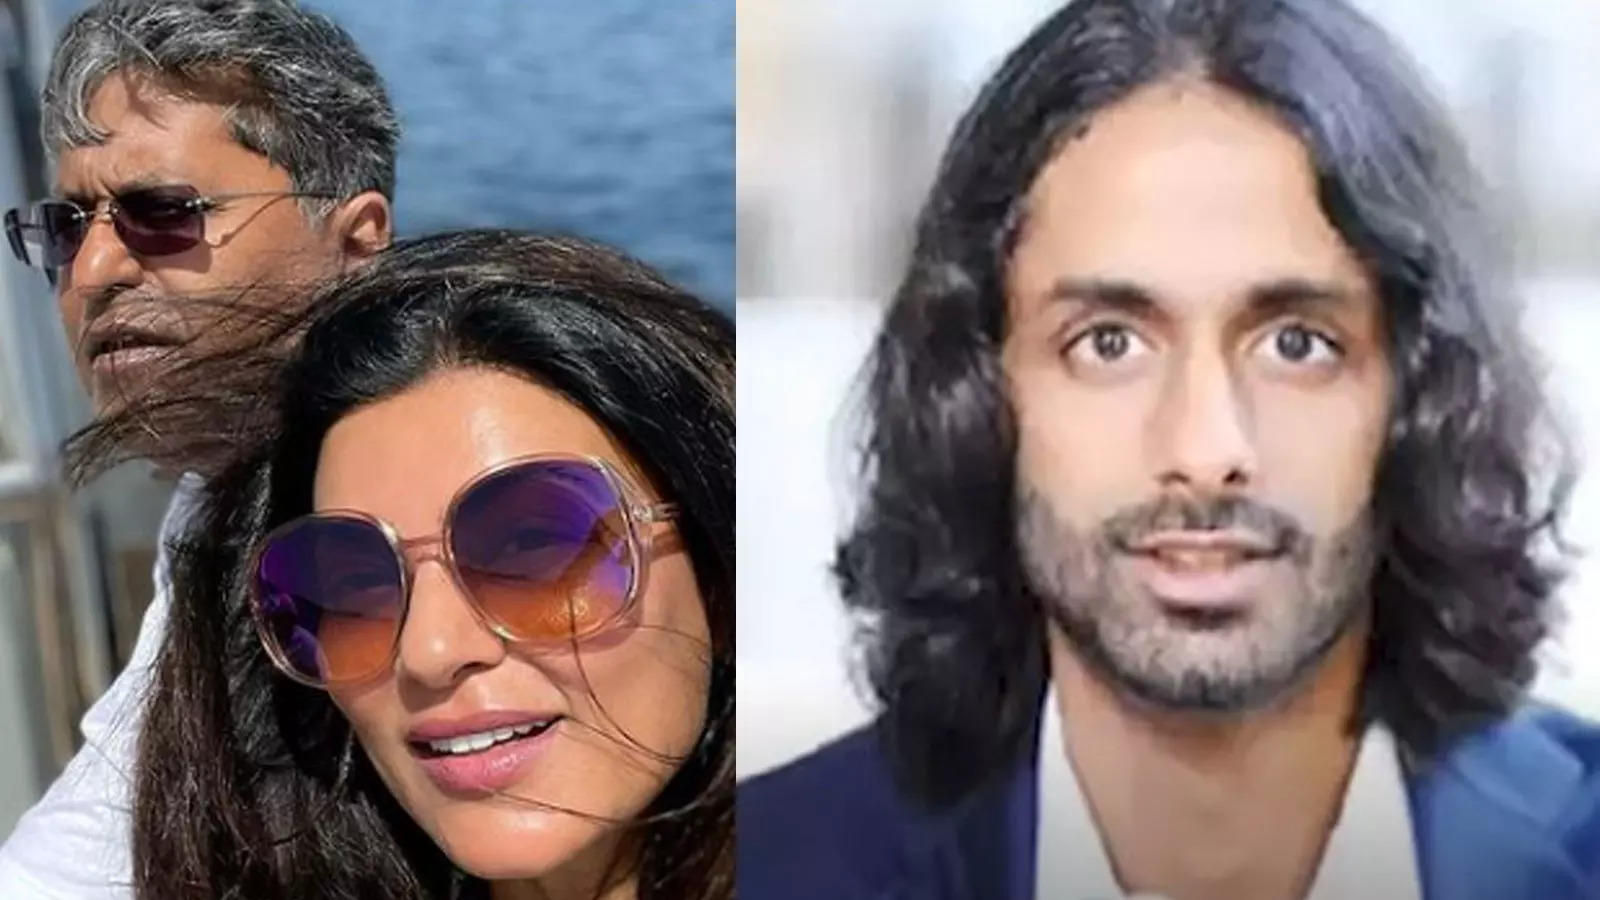 Lalit Modi’s son Ruchir Modi reacts to his father dating Sushmita Sen: ‘It is his life and his decision’ | Entertainment